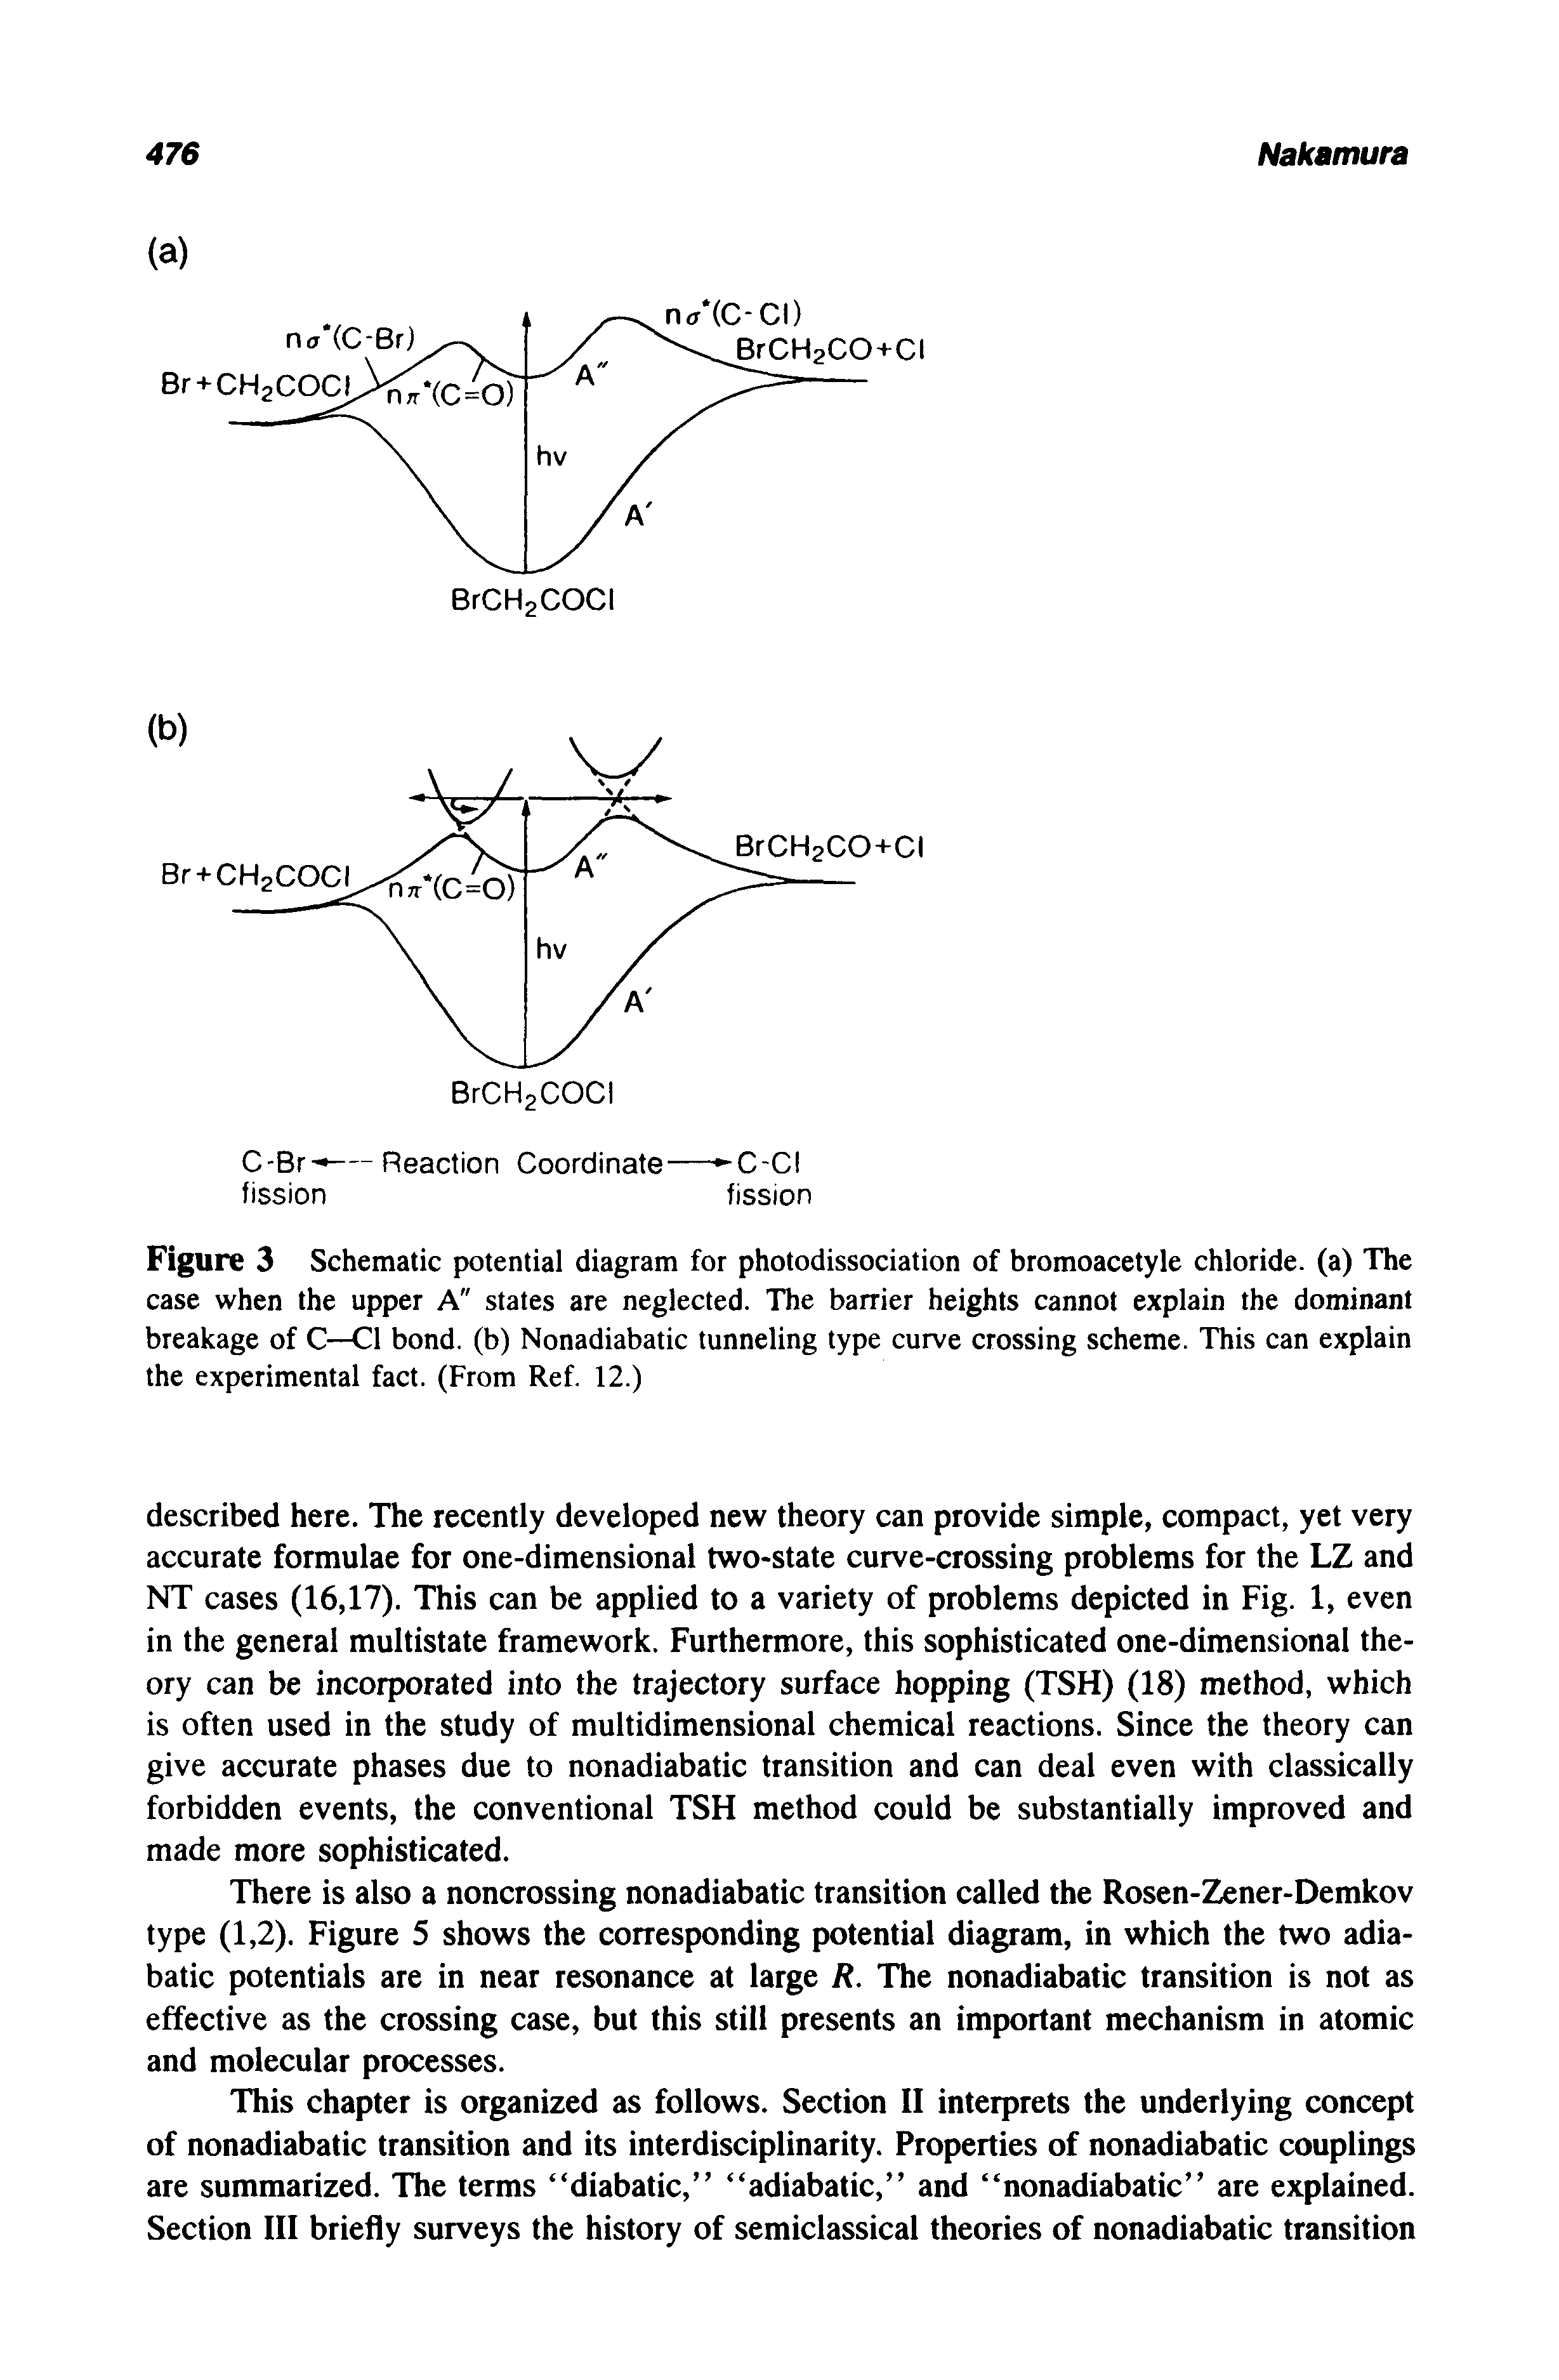 Figure 3 Schematic potential diagram for photodissociation of bromoacetyle chloride, (a) The case when the upper A" states are neglected. The barrier heights cannot explain the dominant breakage of C—Cl bond, (b) Nonadiabatic tunneling type curve crossing scheme. This can explain the experimental fact. (From Ref. 12.)...